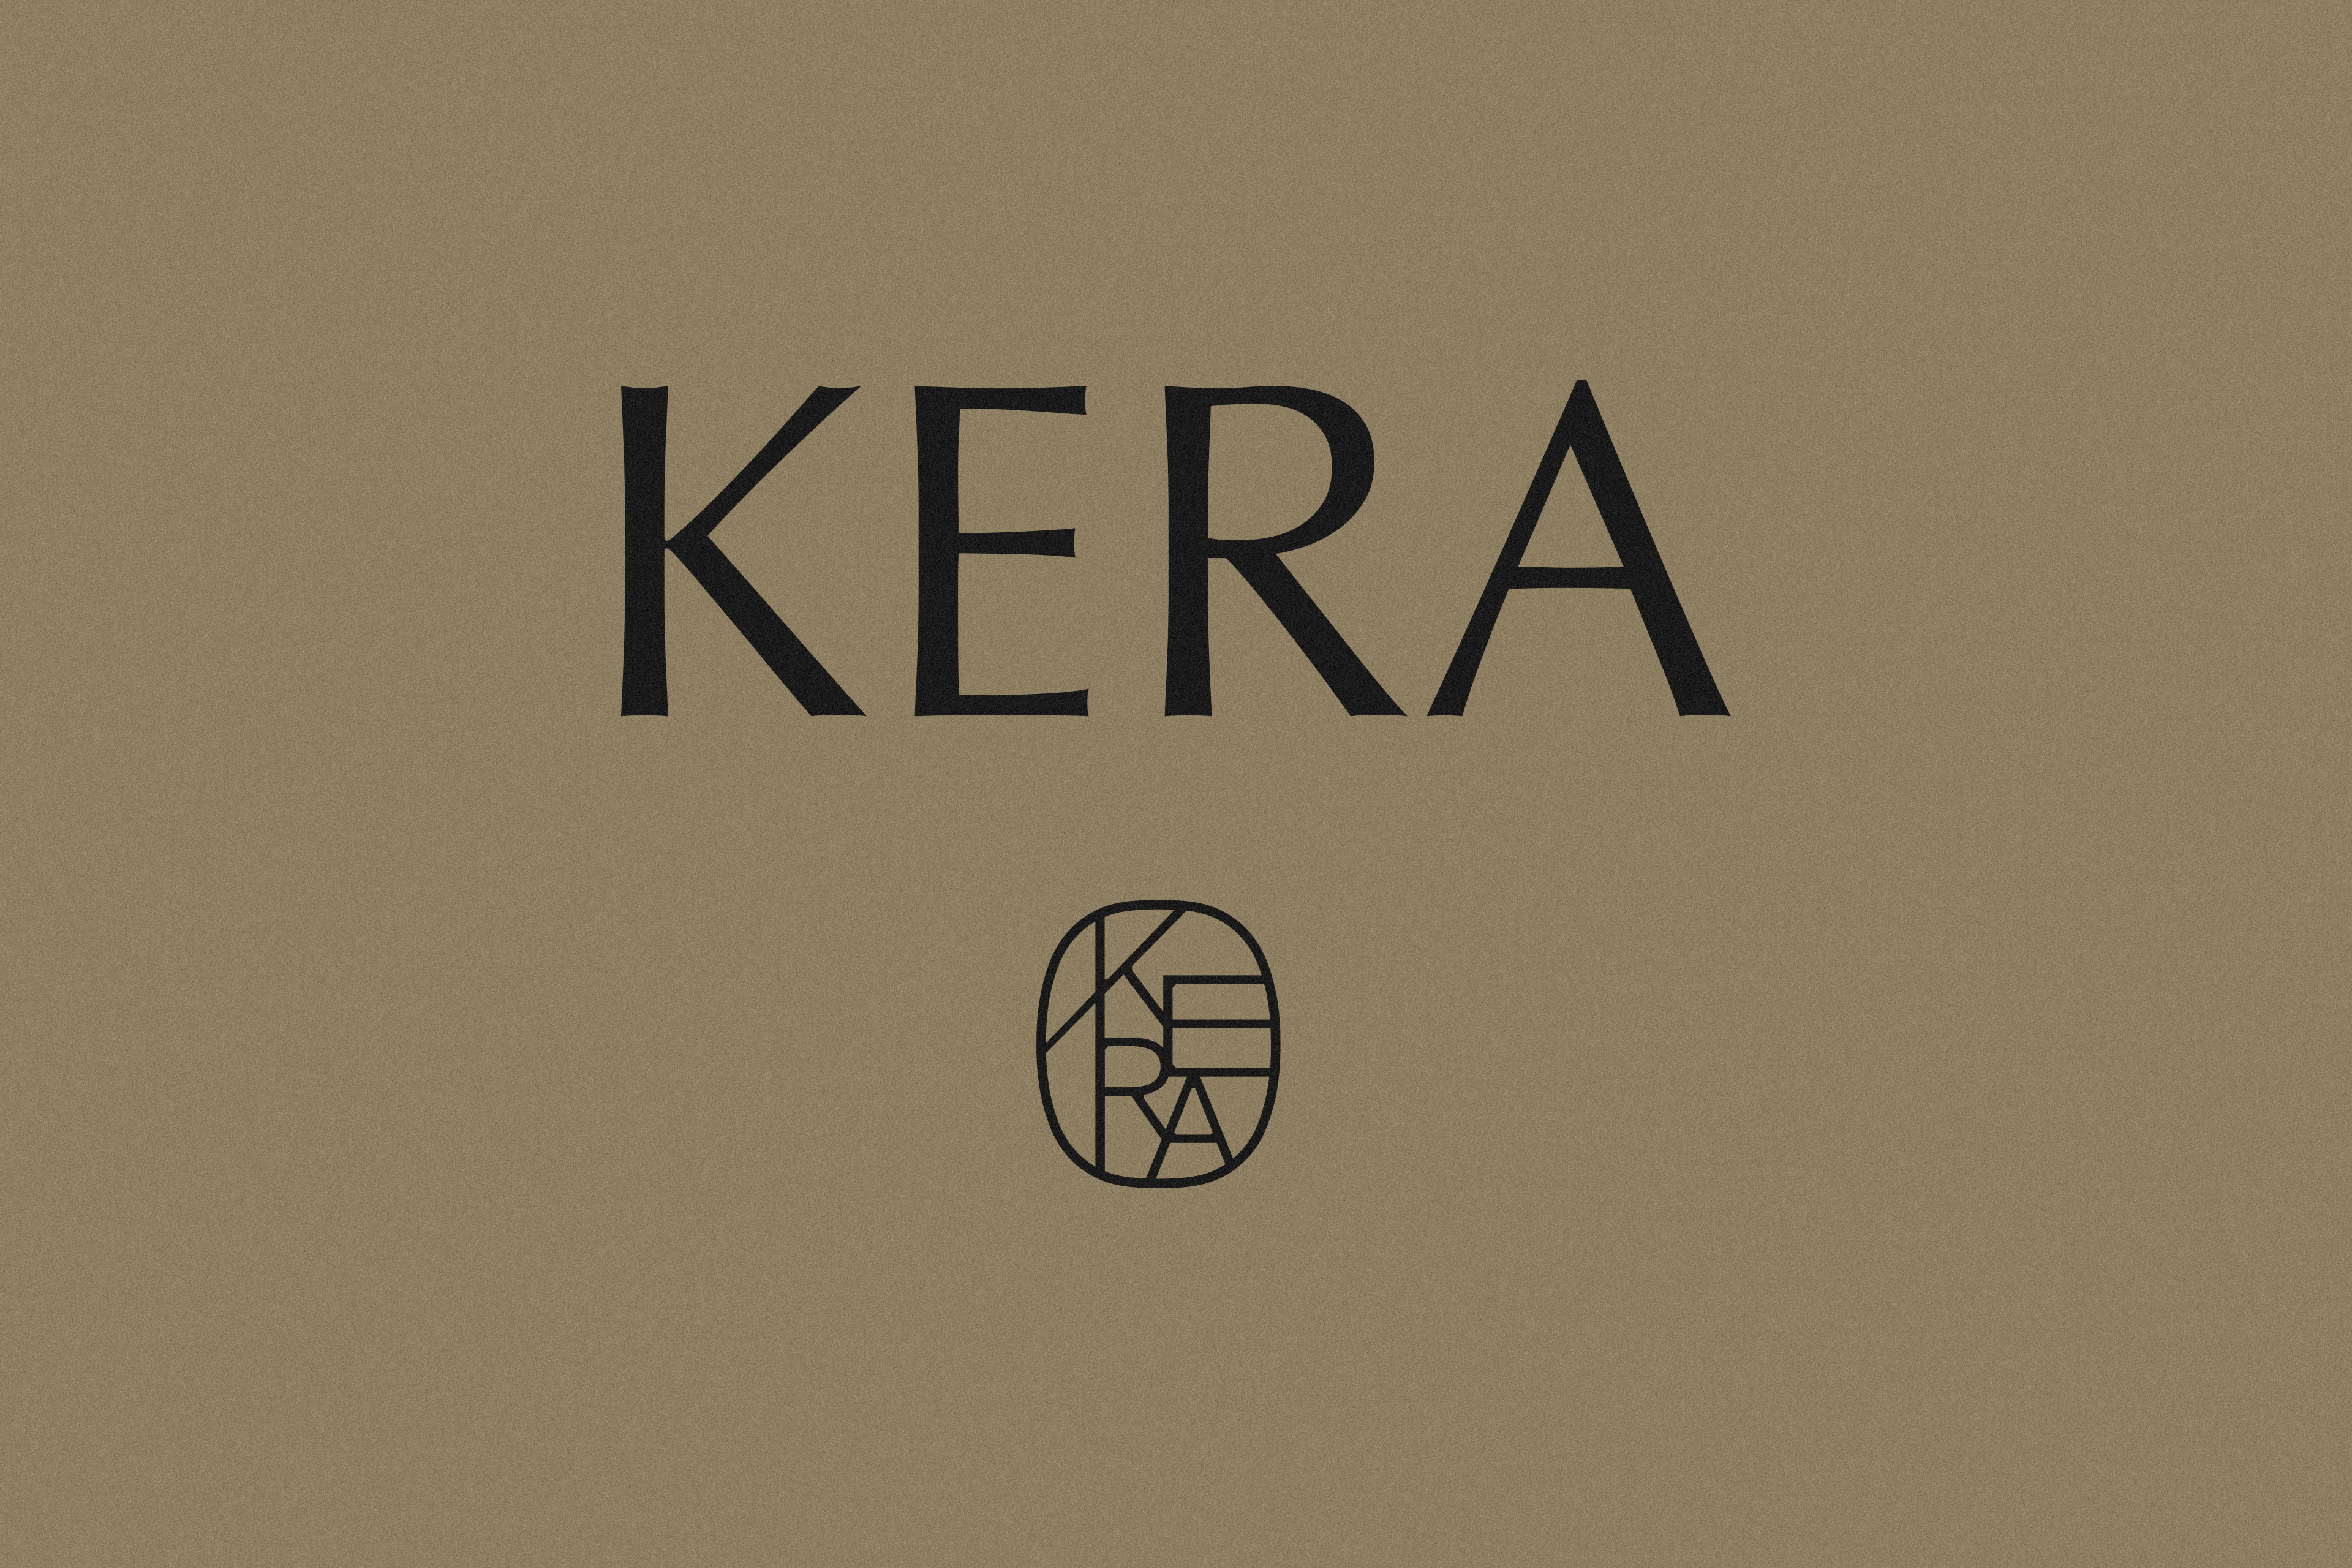 A black and white photo with the word kera on it.